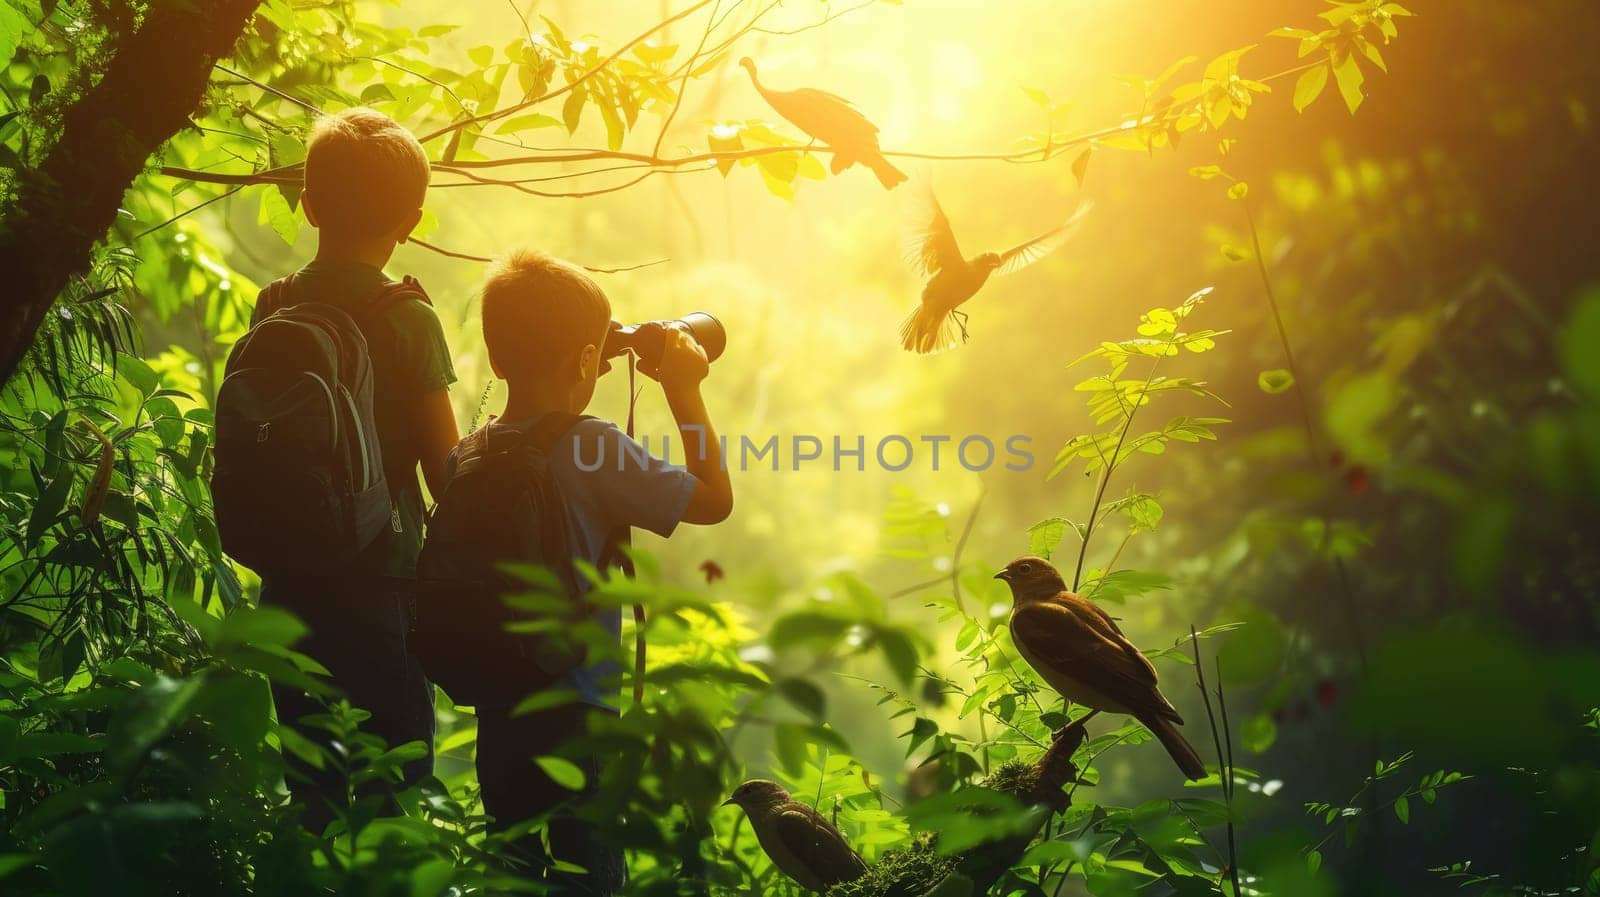 young explorers use binoculars to observe a colorful bird, immersed in the vibrant foliage of a dense forest. AIG41